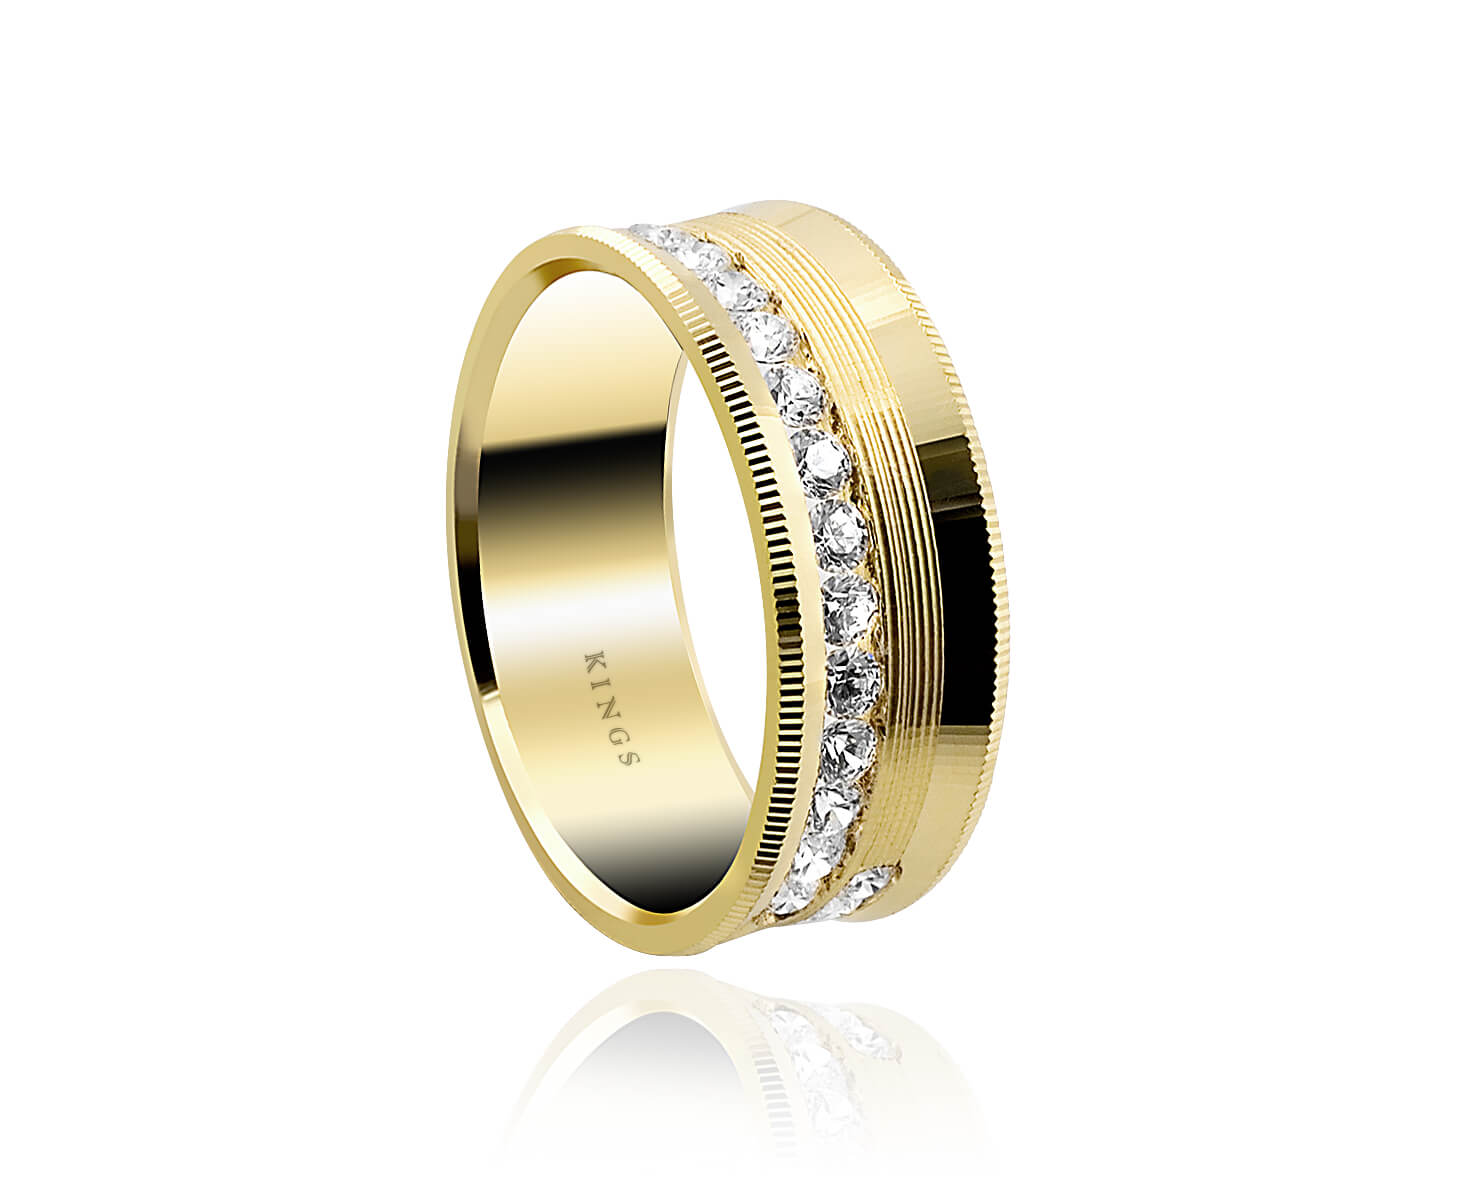 Yellow Gold Diamond Ring U shape Kings Men's 8.50mm Yellow Gold Ring with approximately 1.3 carat of brilliant cut diamonds